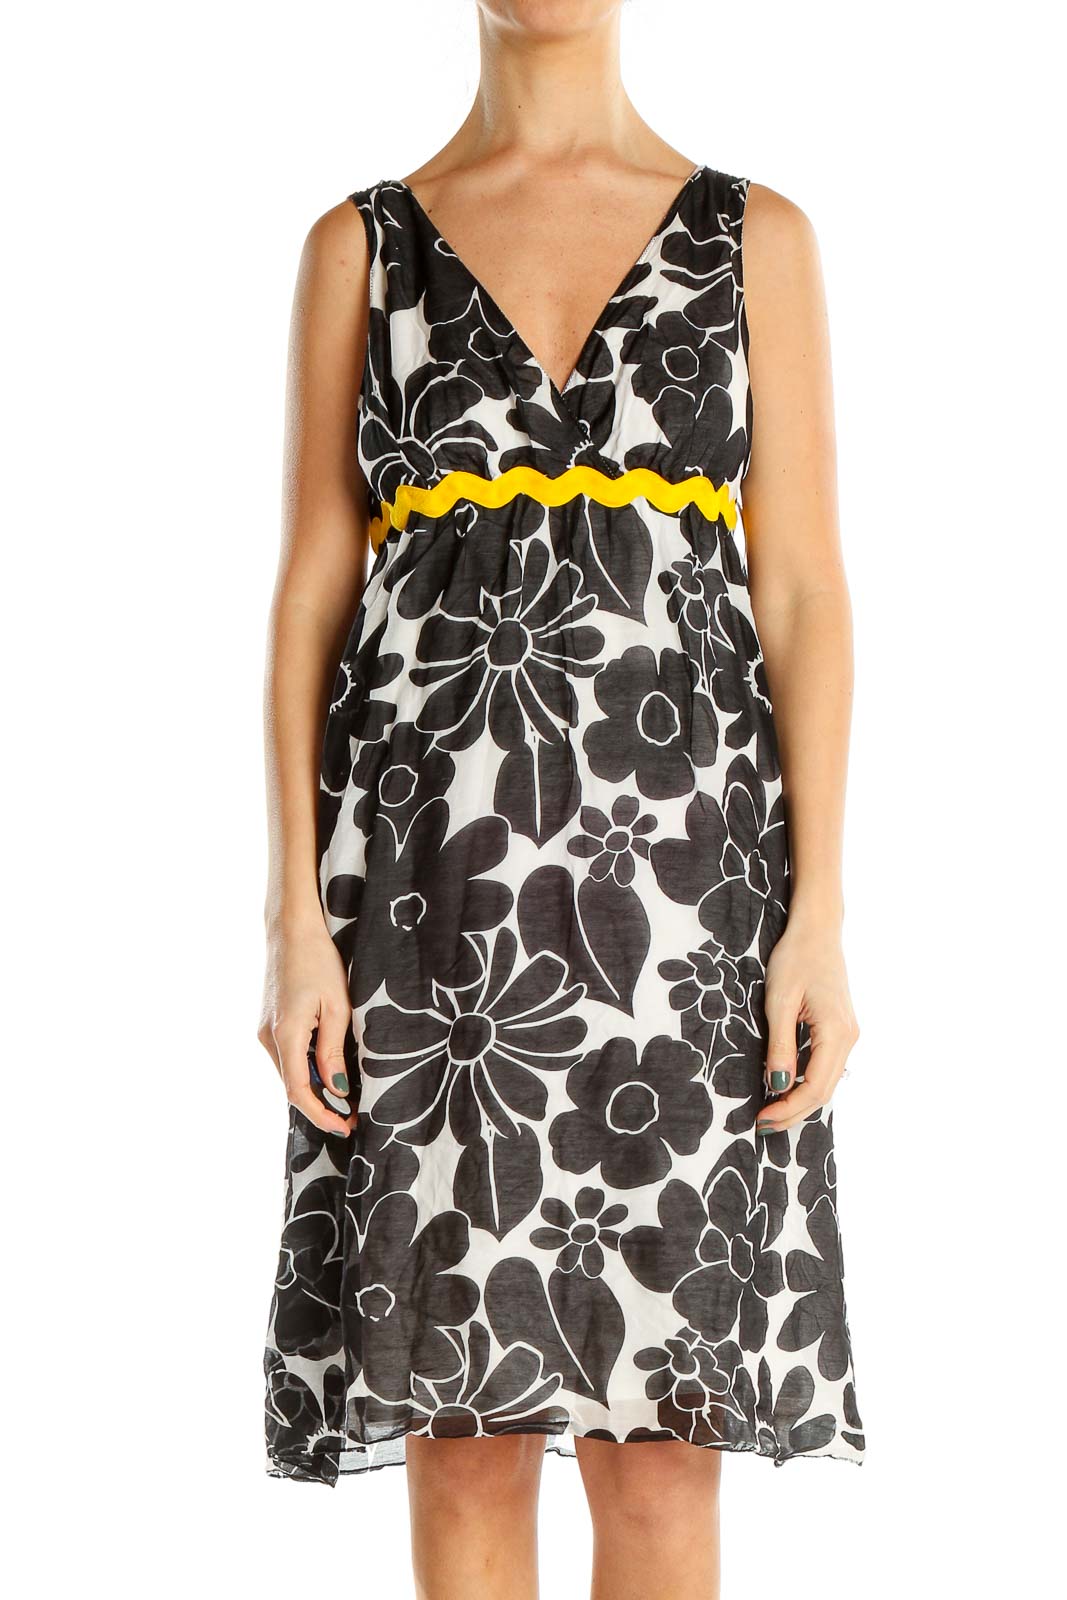 Black White Floral Print Retro A-Line Dress With Yellow Stitch Waist Front